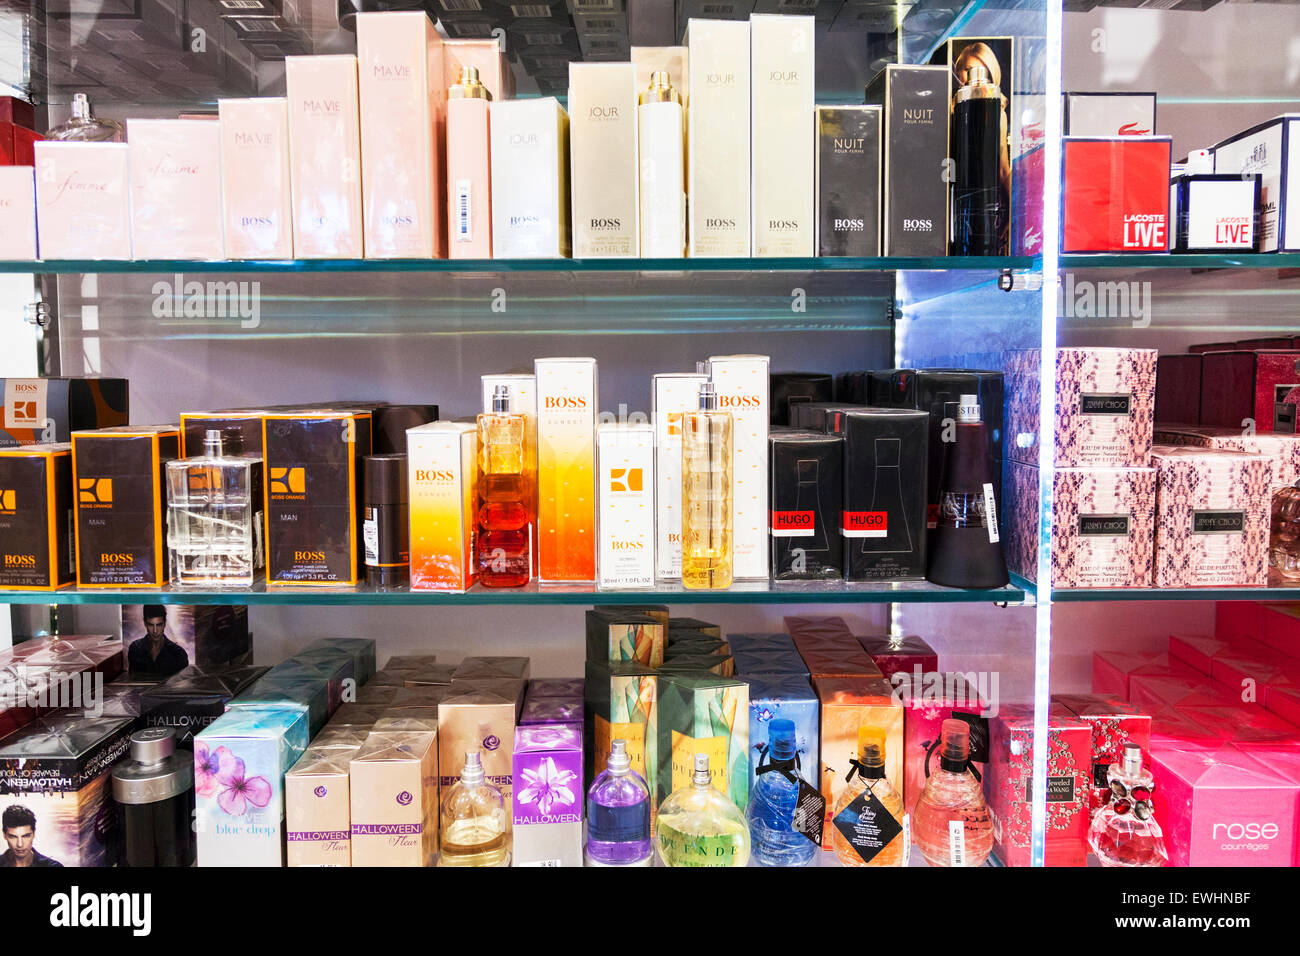 Perfumes aftershave bottles shop display Hugo Boss bottles store Lacoste Jimmy Choo Stock Photo